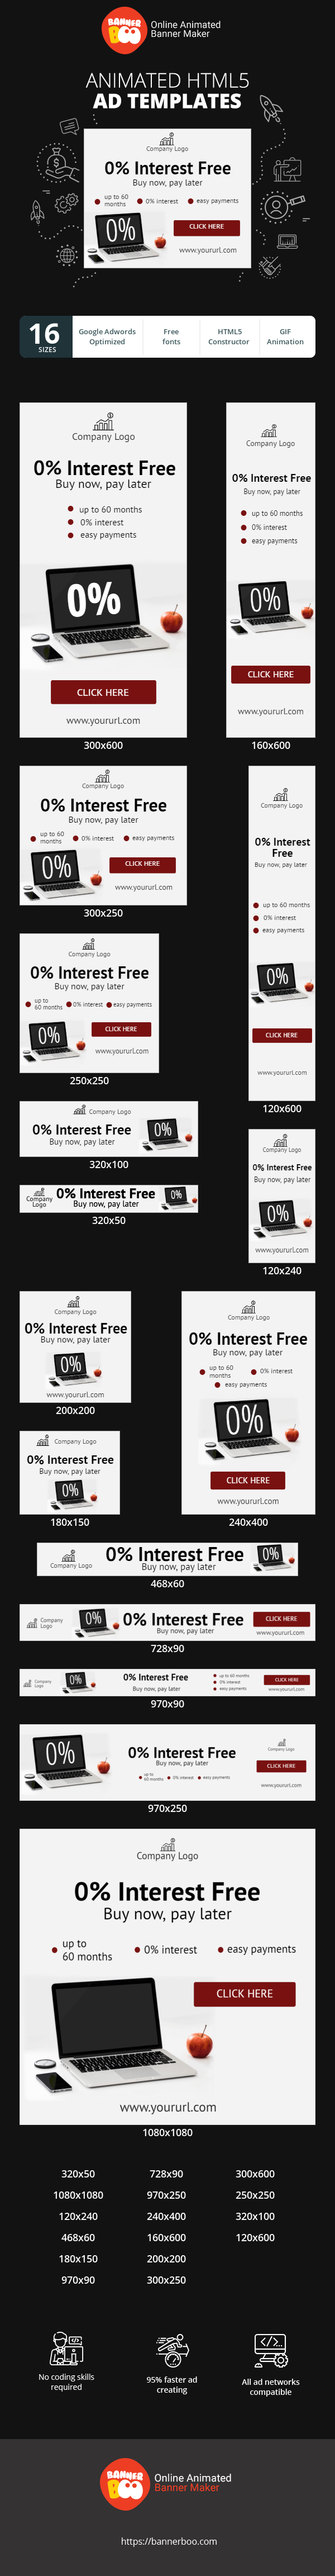 Banner ad template — Interest Free — Buy now, pay later